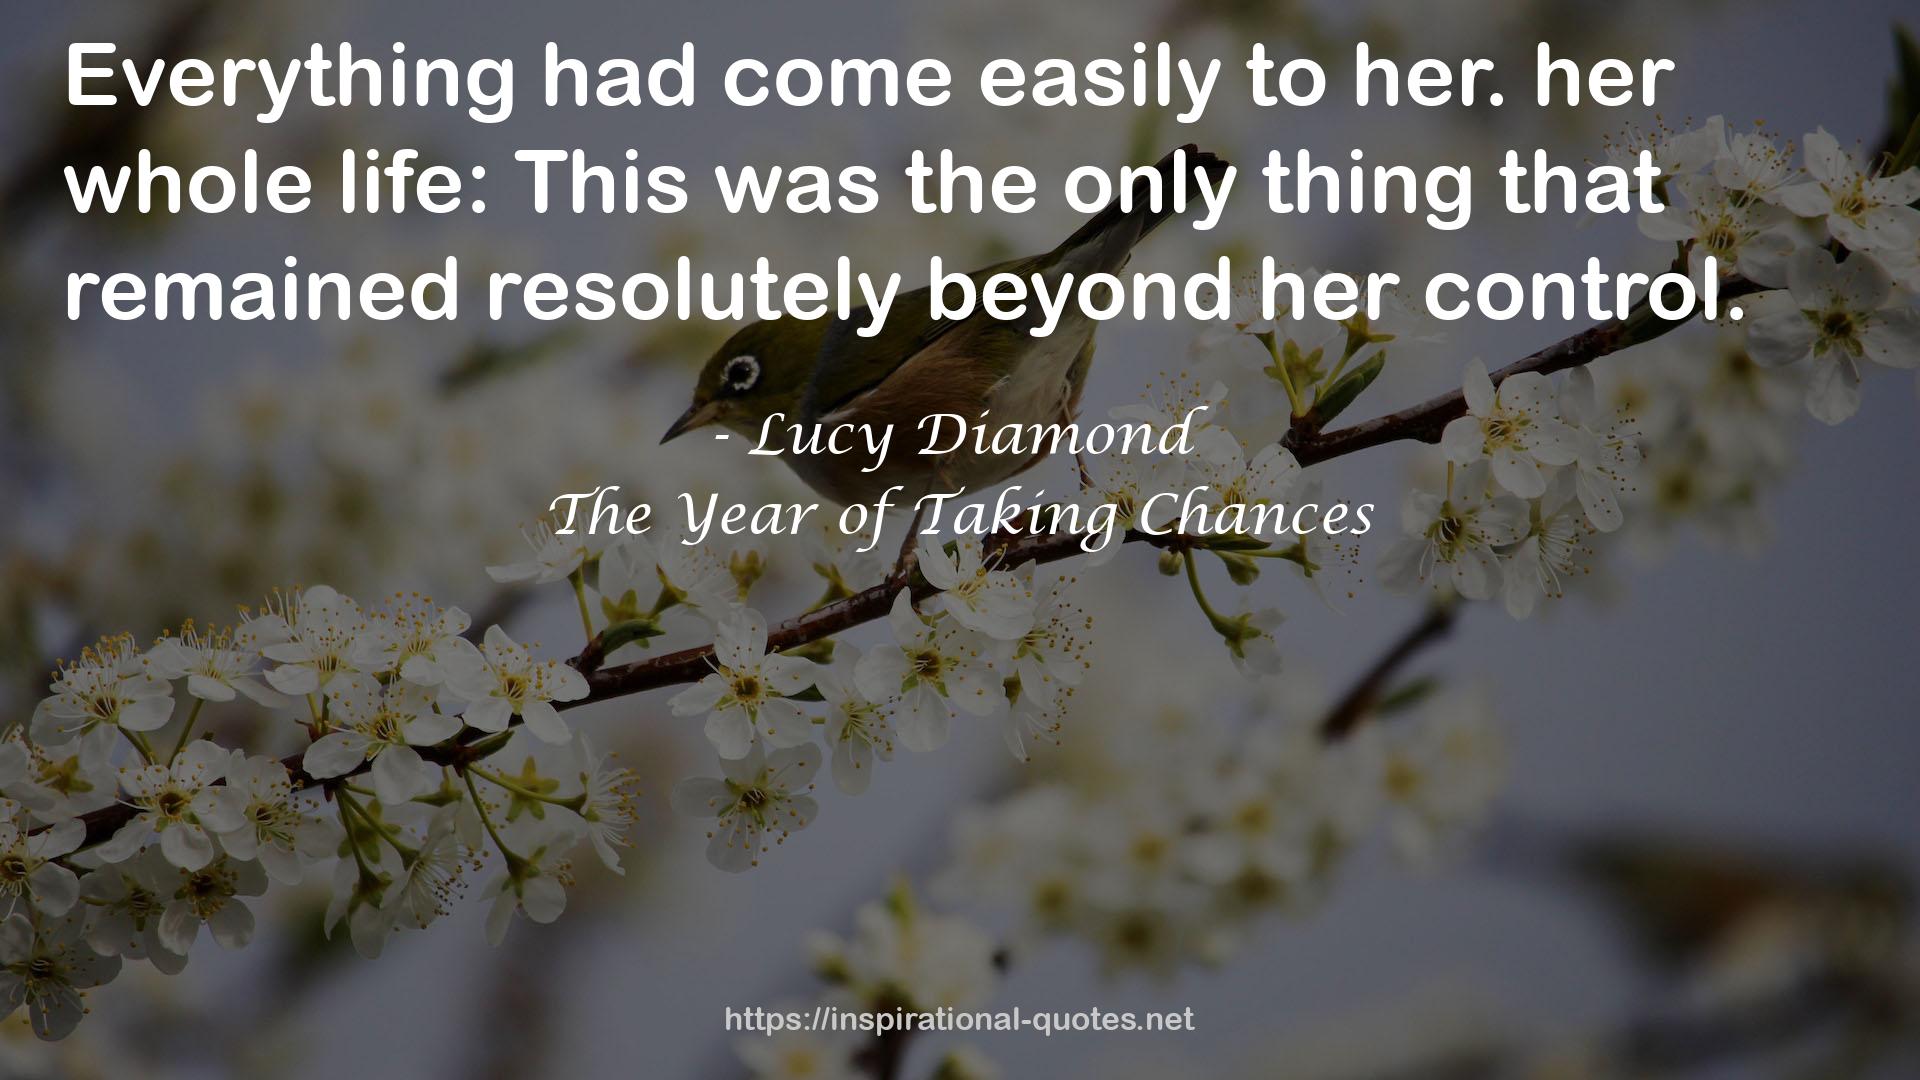 The Year of Taking Chances QUOTES